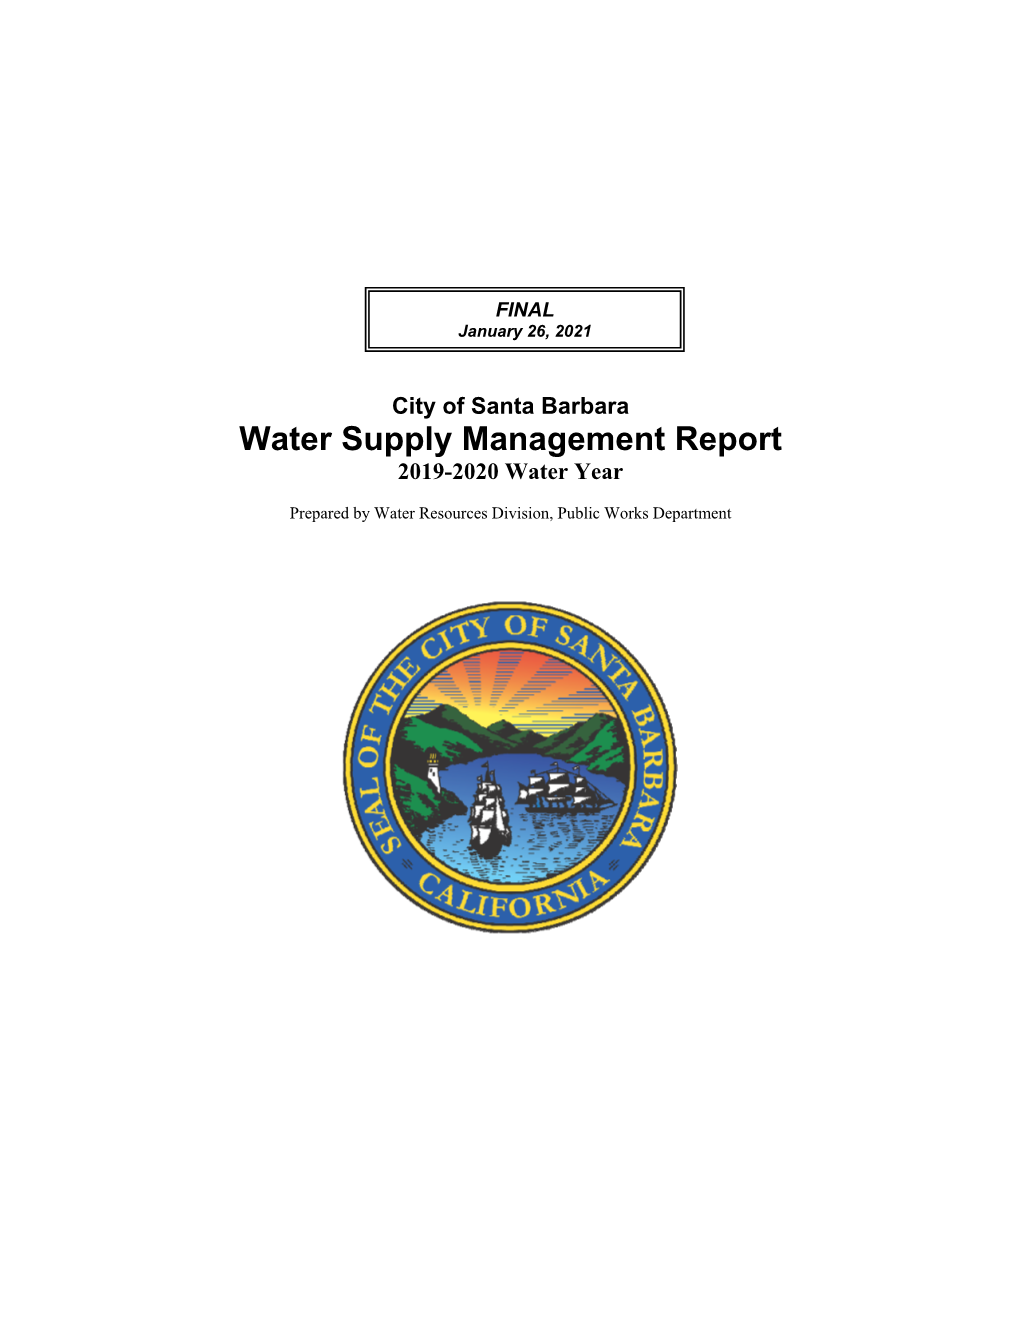 2020 Water Supply Management Report Produce Any Significant Inflow to Cachuma